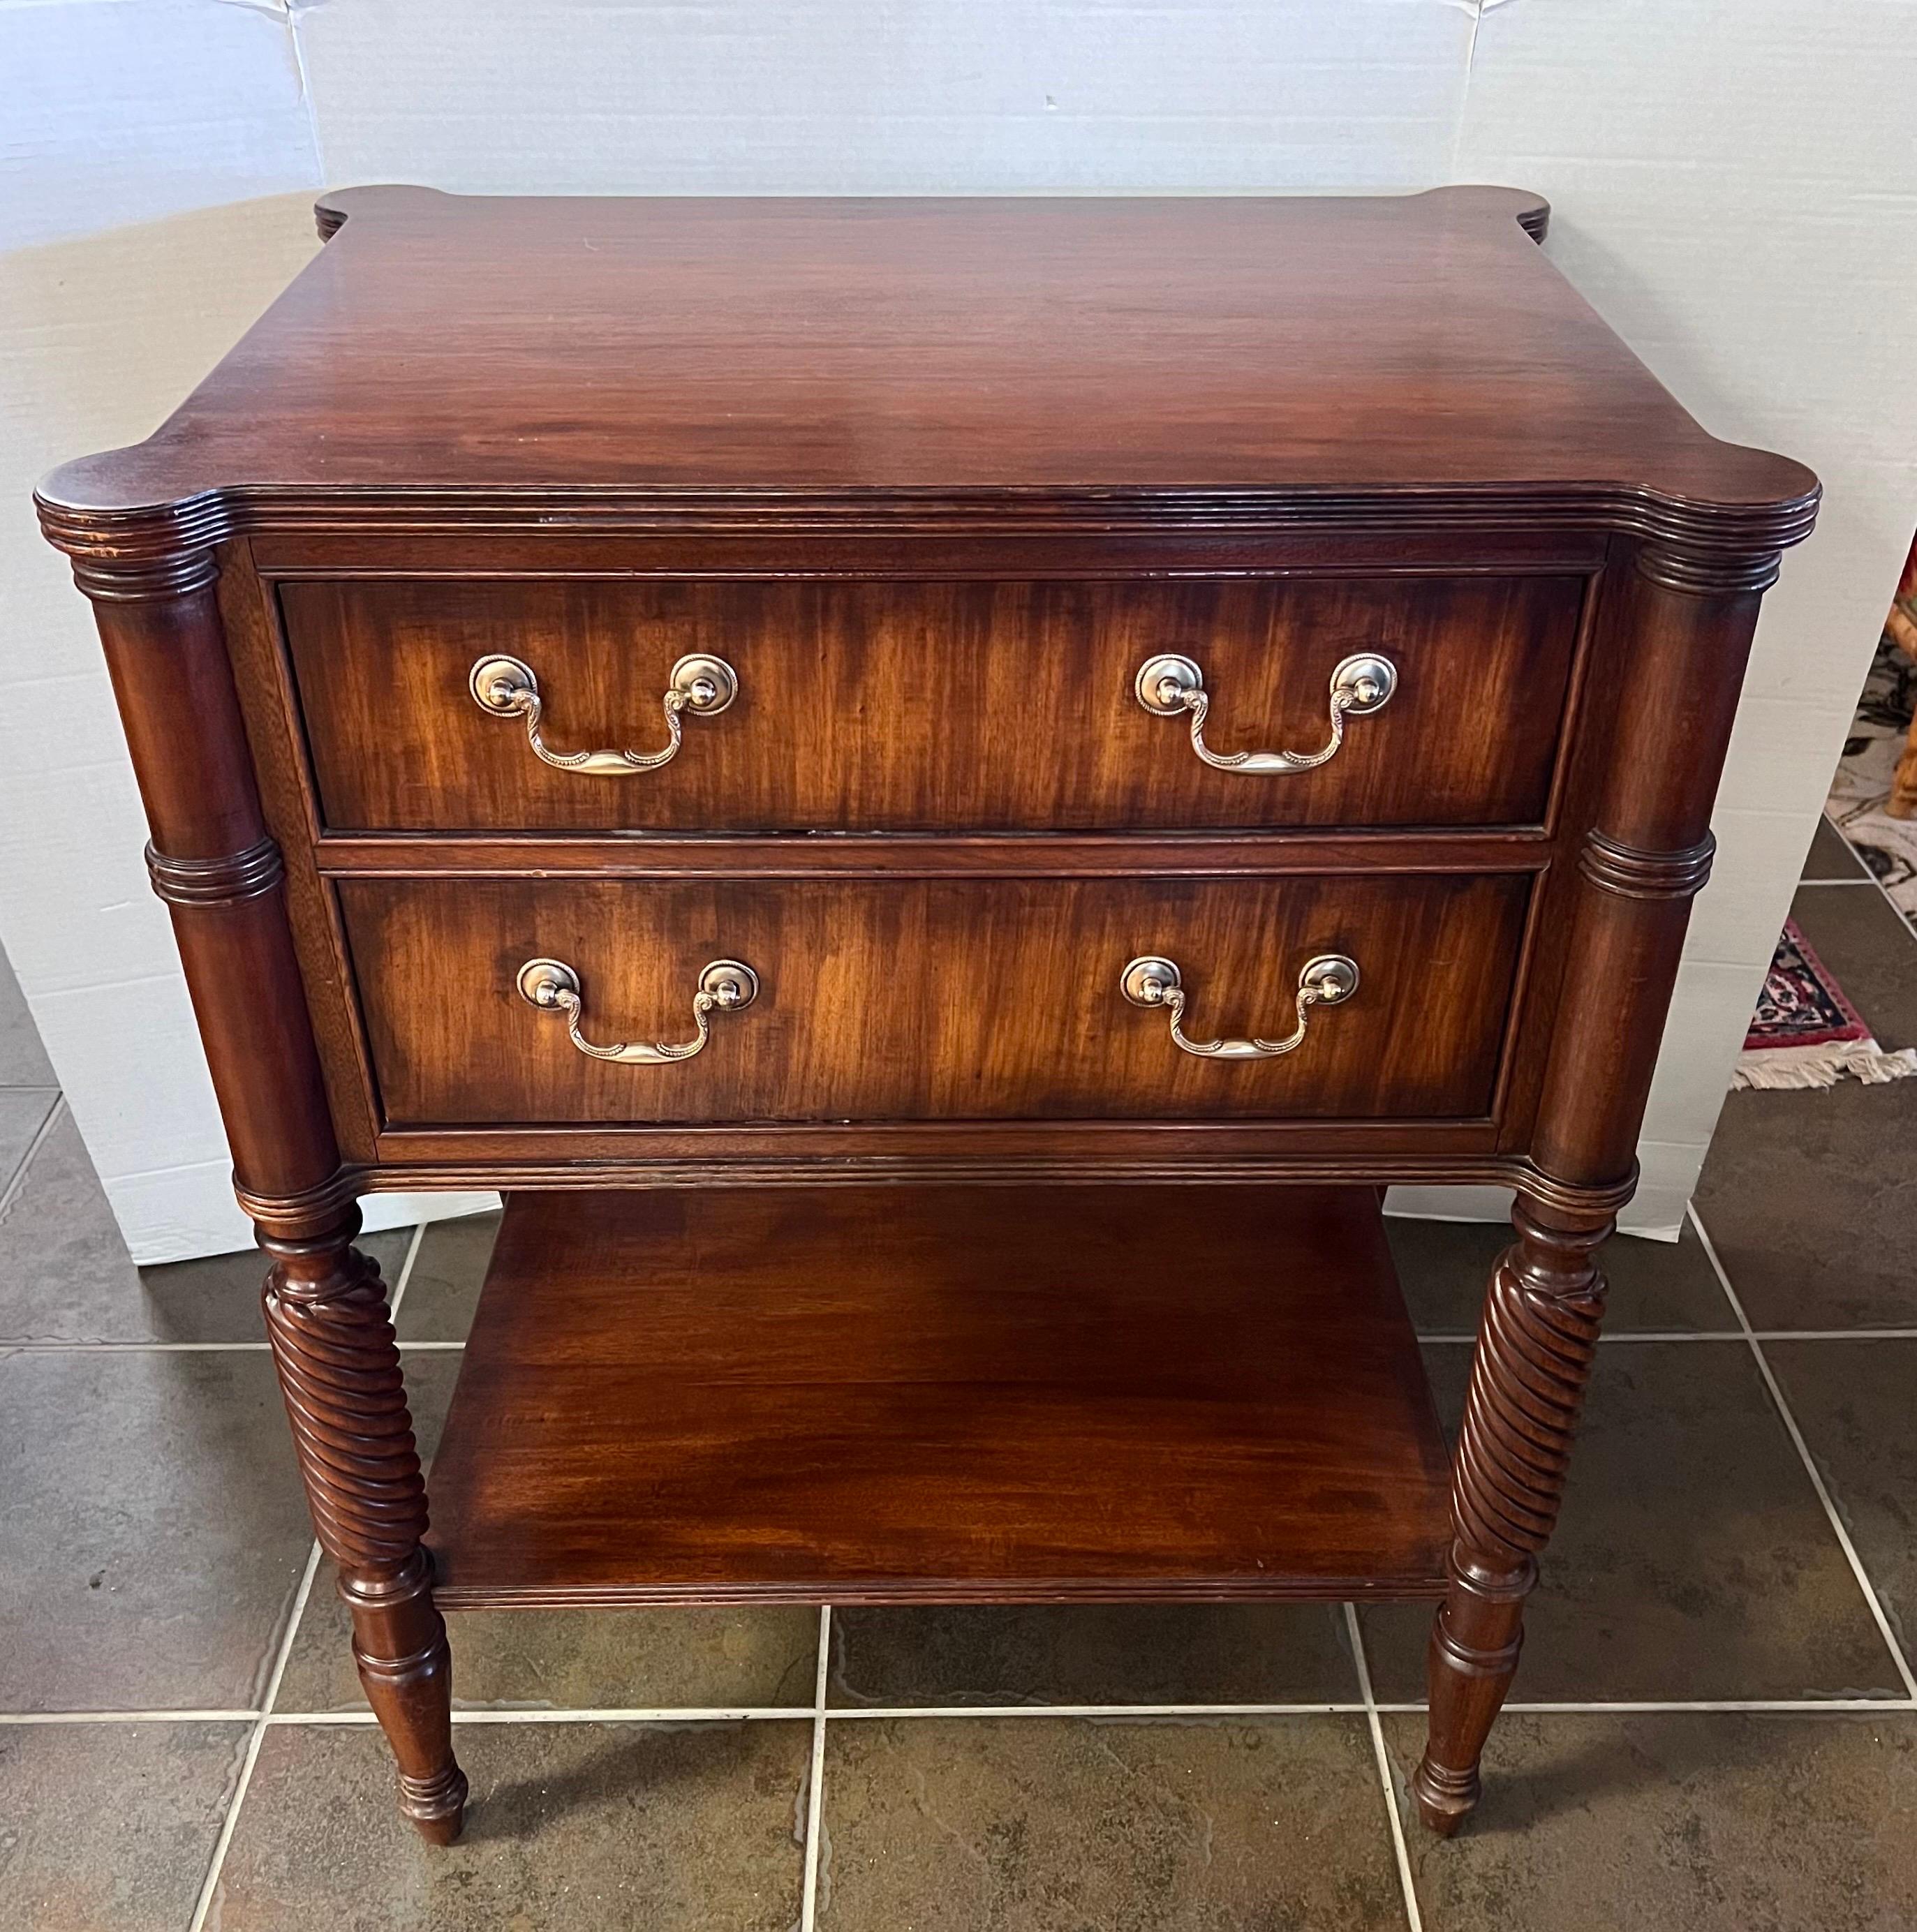 Elegant mahogany two drawer nightstand of side/end table.  Note shelf on bottom for extra storage.  Top is rectangular with rounded corners that cap the intricately turned fluted legs.